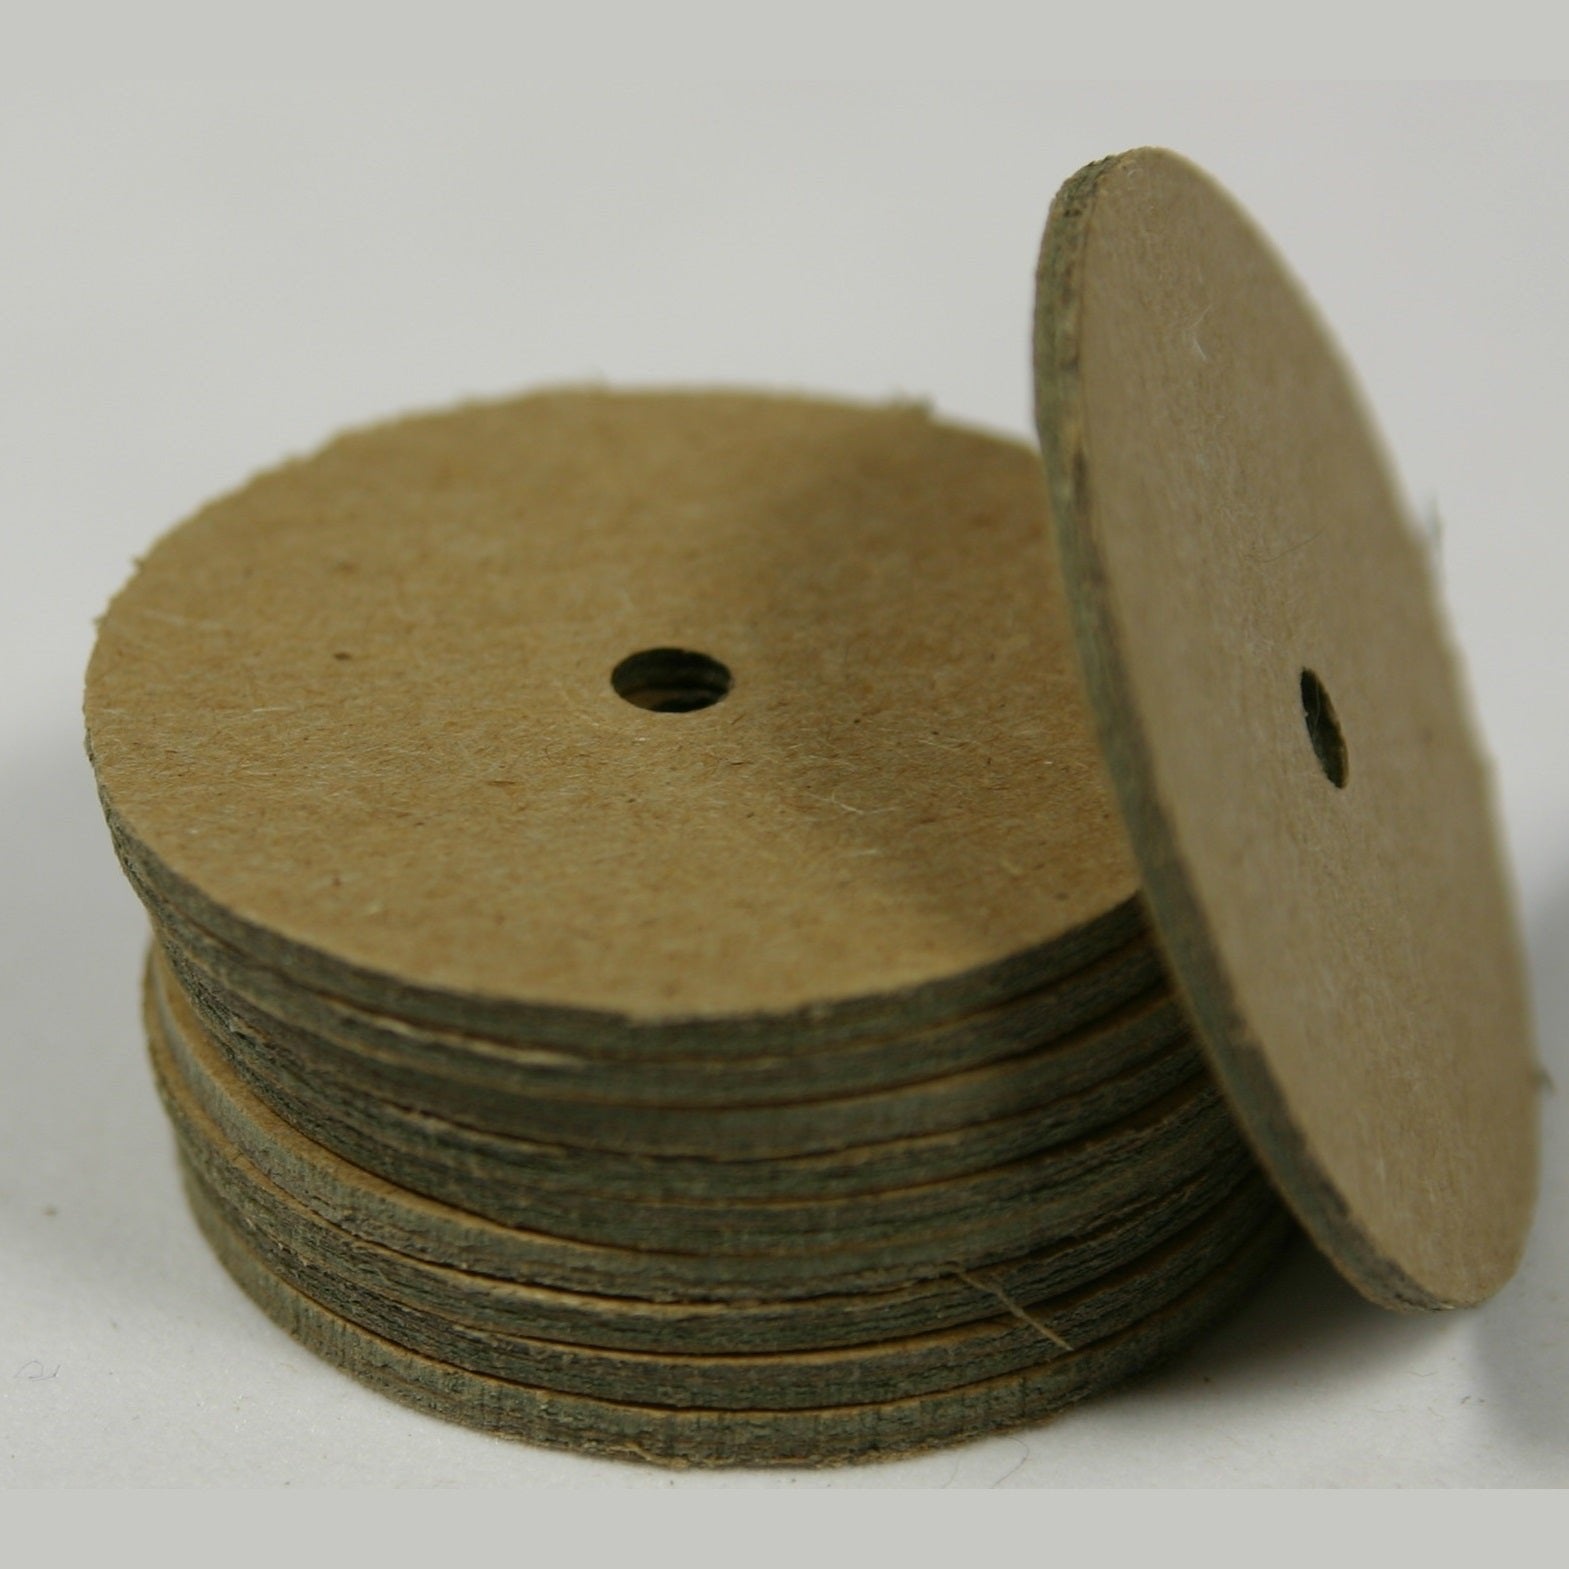 10pc 2" Paper Disc with 3/16" hole